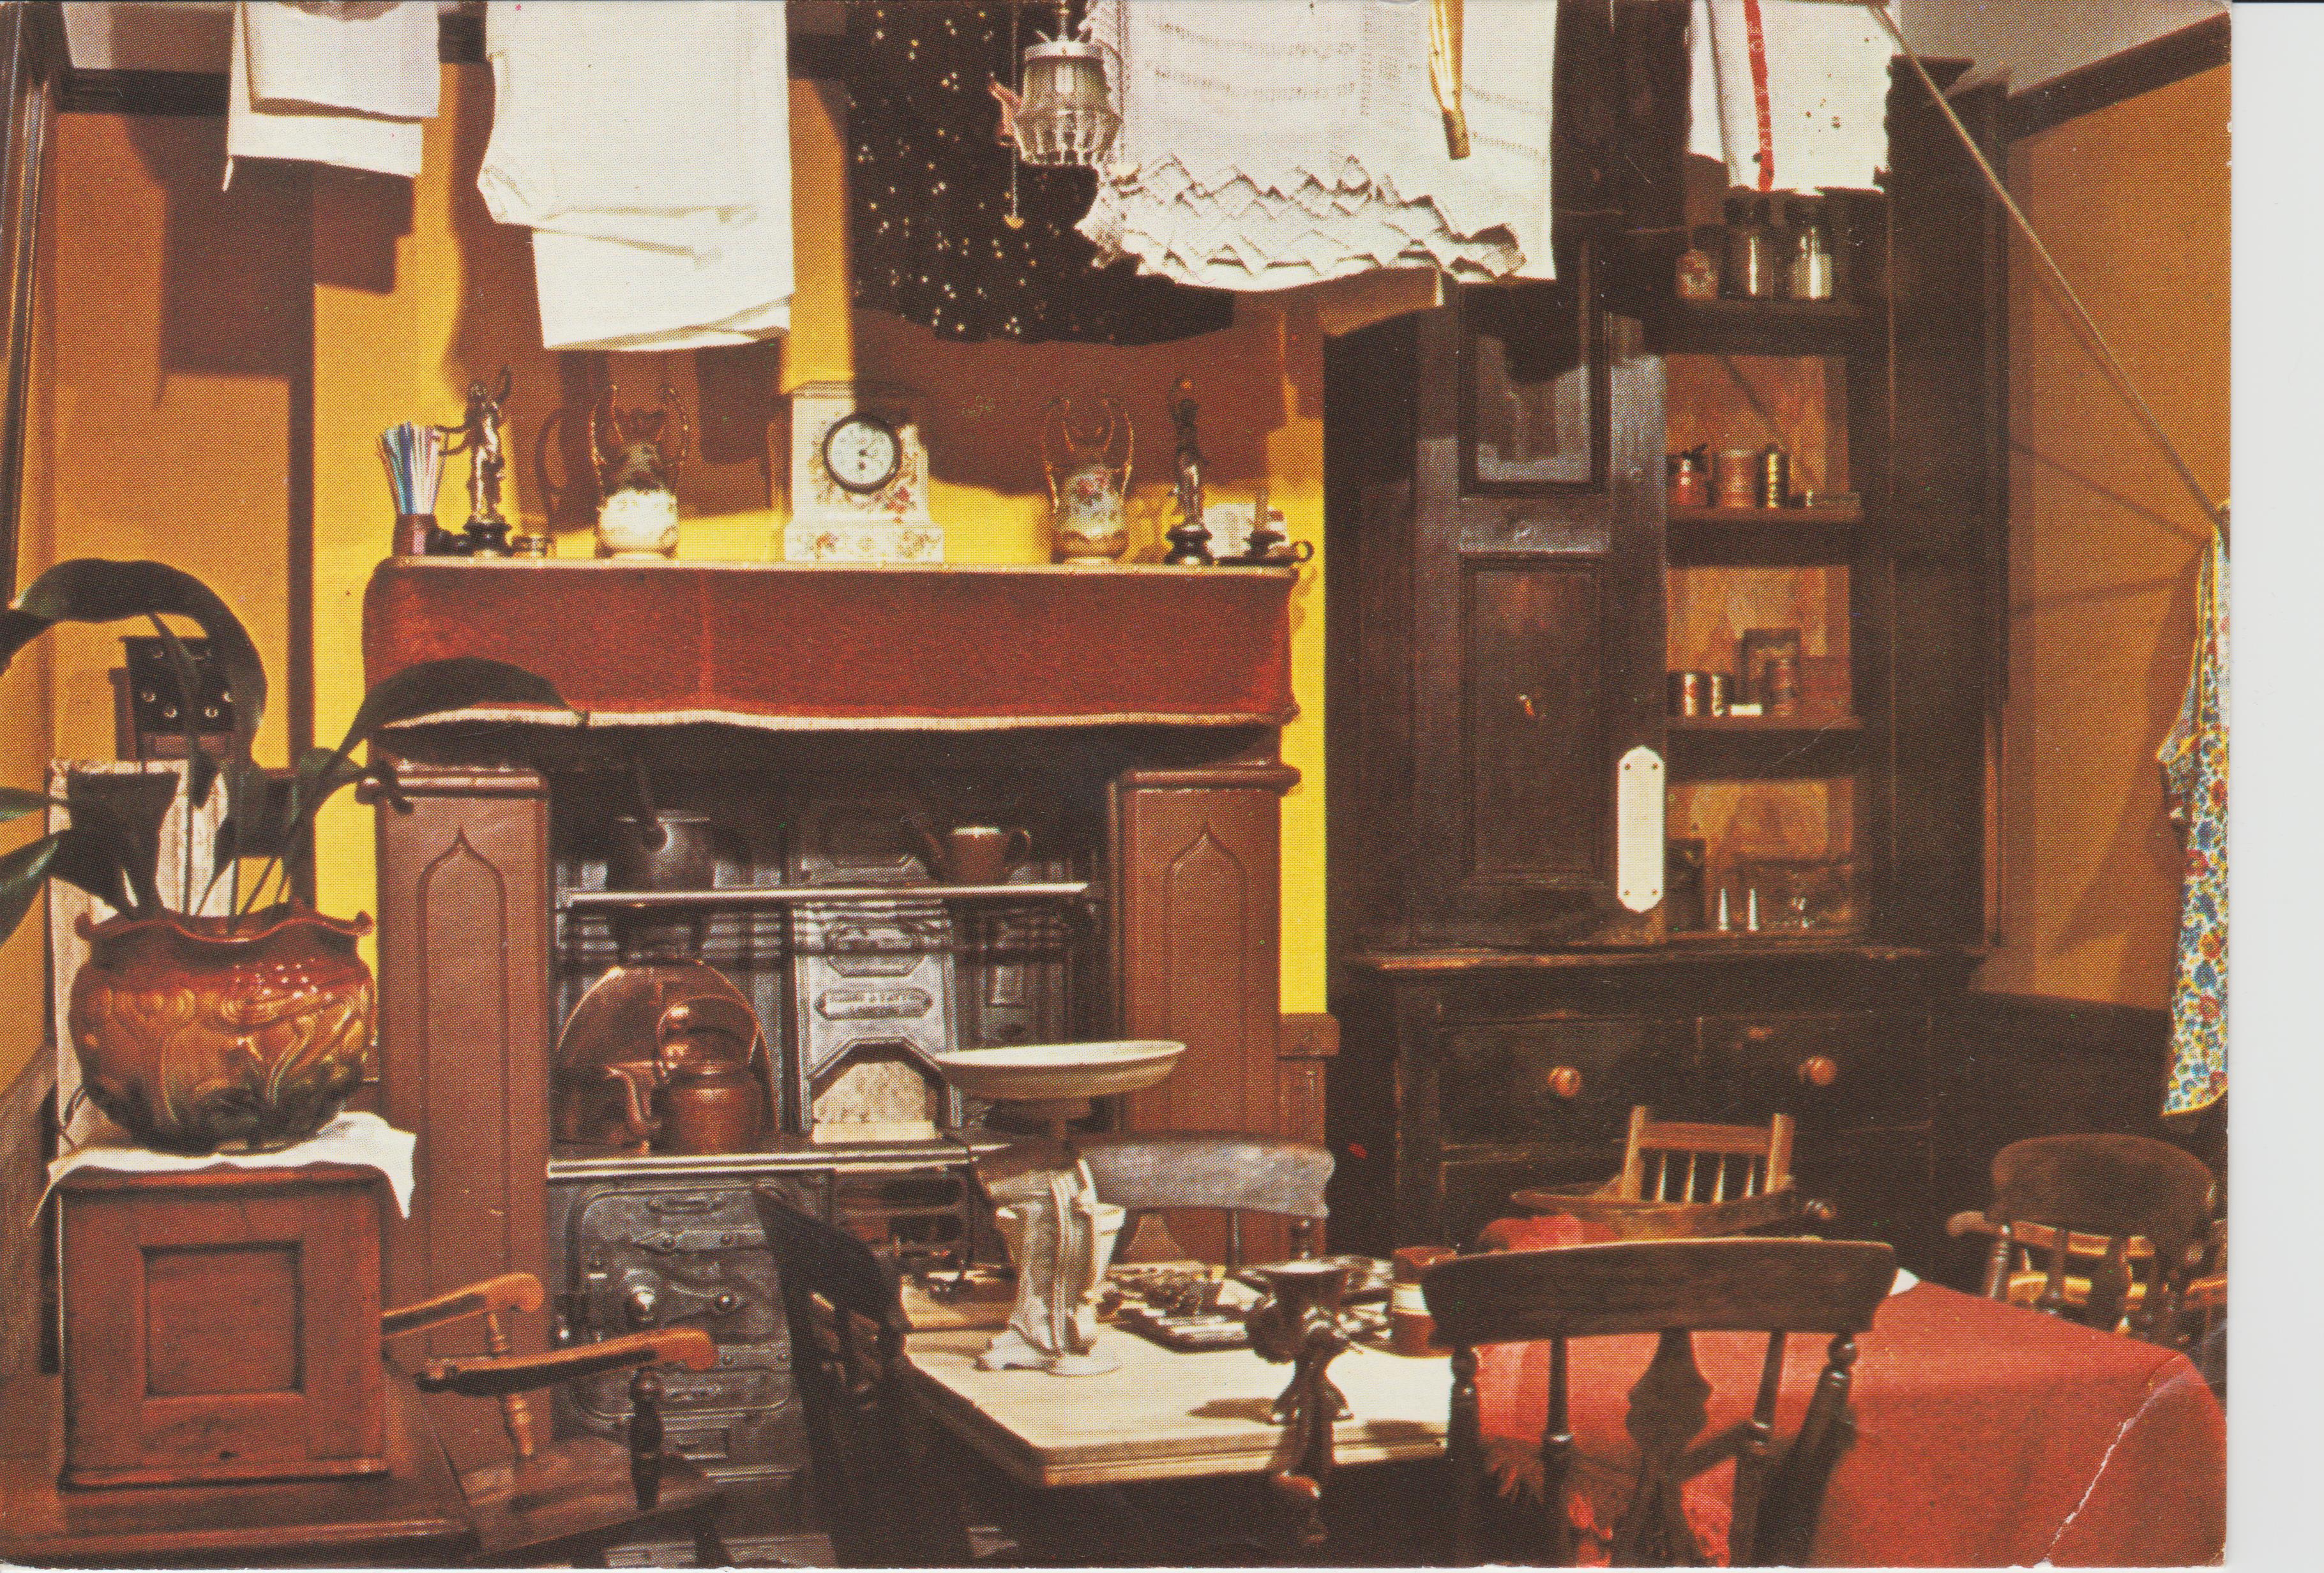 Workman’s Living Room in the Potteries, 1920-30 (REM CC BY-NC-SA)